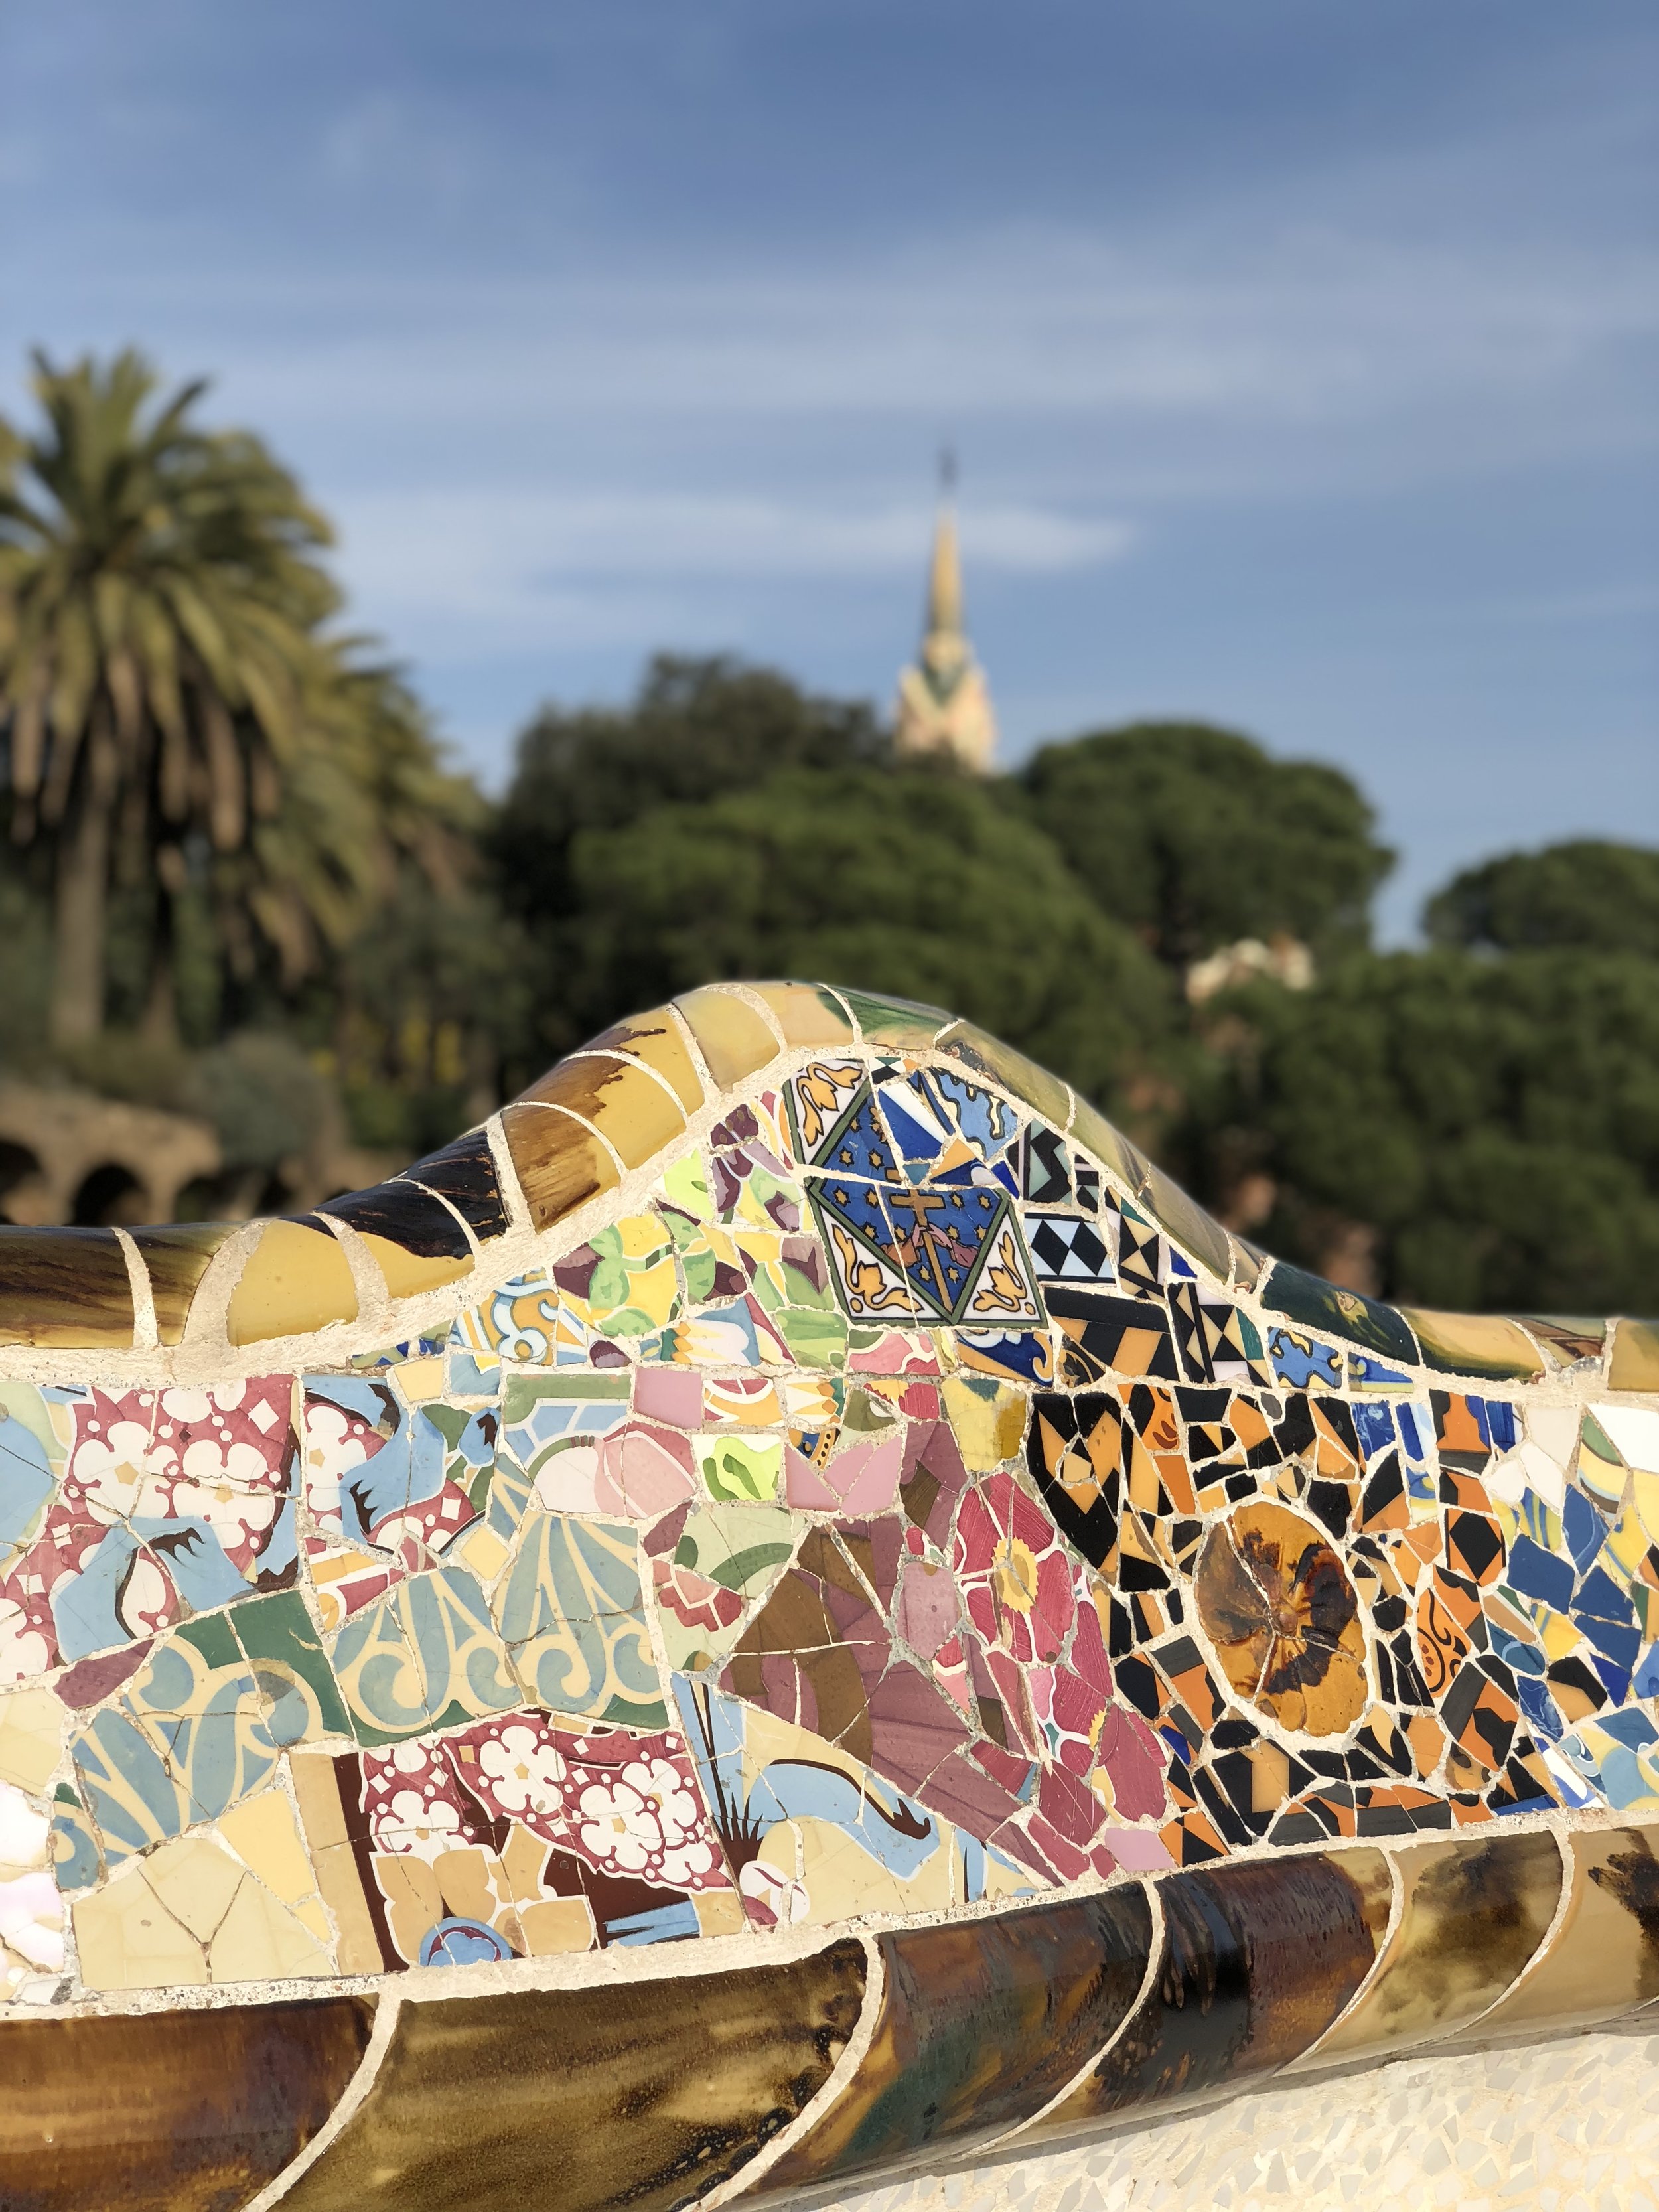 Antonio Gaudi's famous Park Guell in Barcelona, Spain